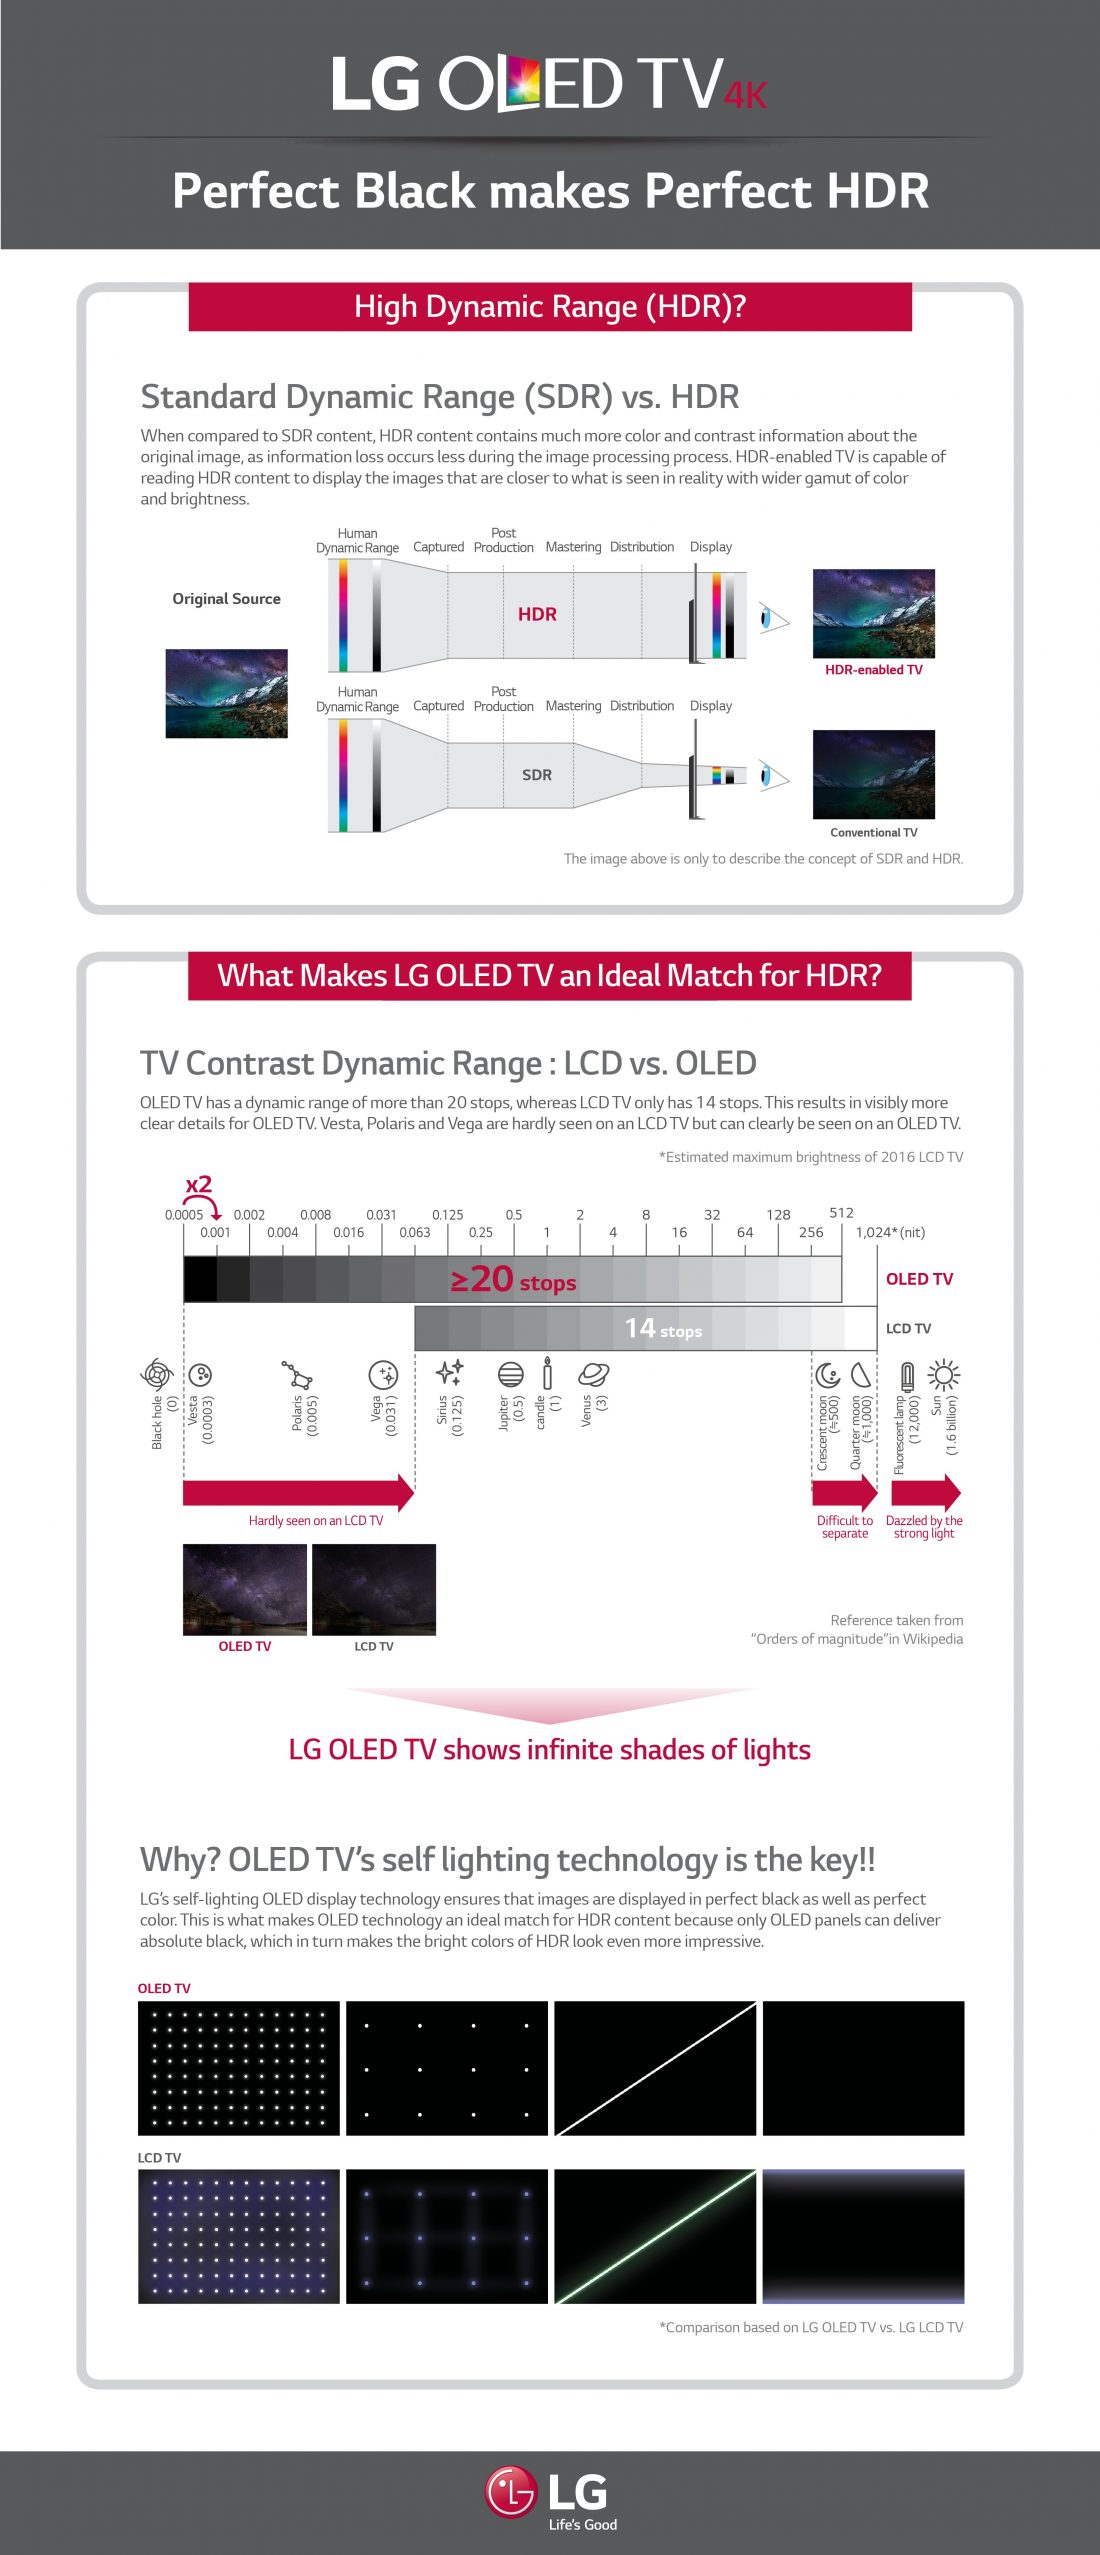 This infographic titled, “LG OLED TV 4K: Perfect Black Makes Perfect HDR,” compares High Dynamic Range (HDR) technology to Standard Dynamic Range (SDR), and explains why LG OLED TVs are perfect for HDR.